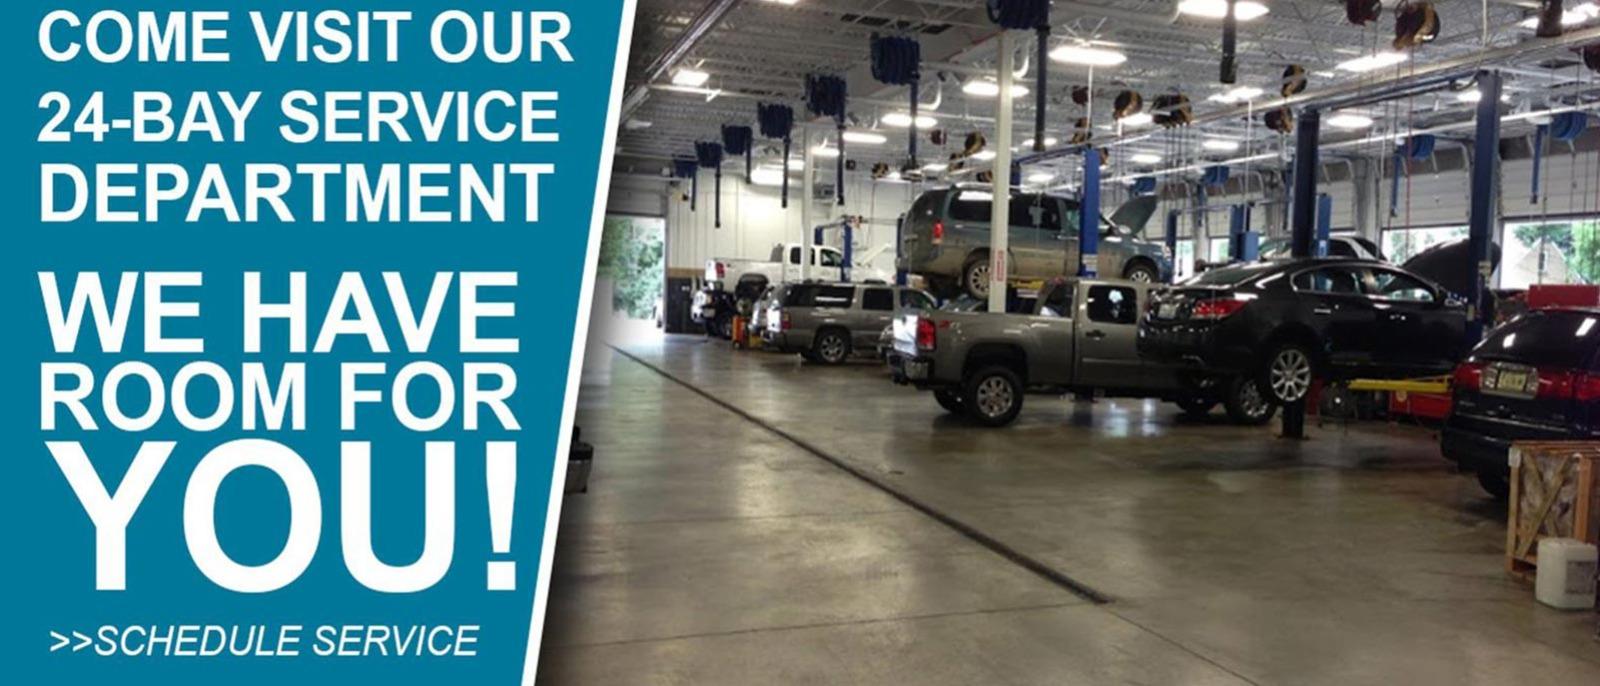 Schedule Service. Quick Service. Oil Change. Replace Brakes. Rotate Tires. Replace Battery. Bad Battery. Windshield Wipers. GMC. Buick. Chevrolet. Honda. Cadillac. Automotive Service Department. Automotive Service. Schedule Automotive Service.